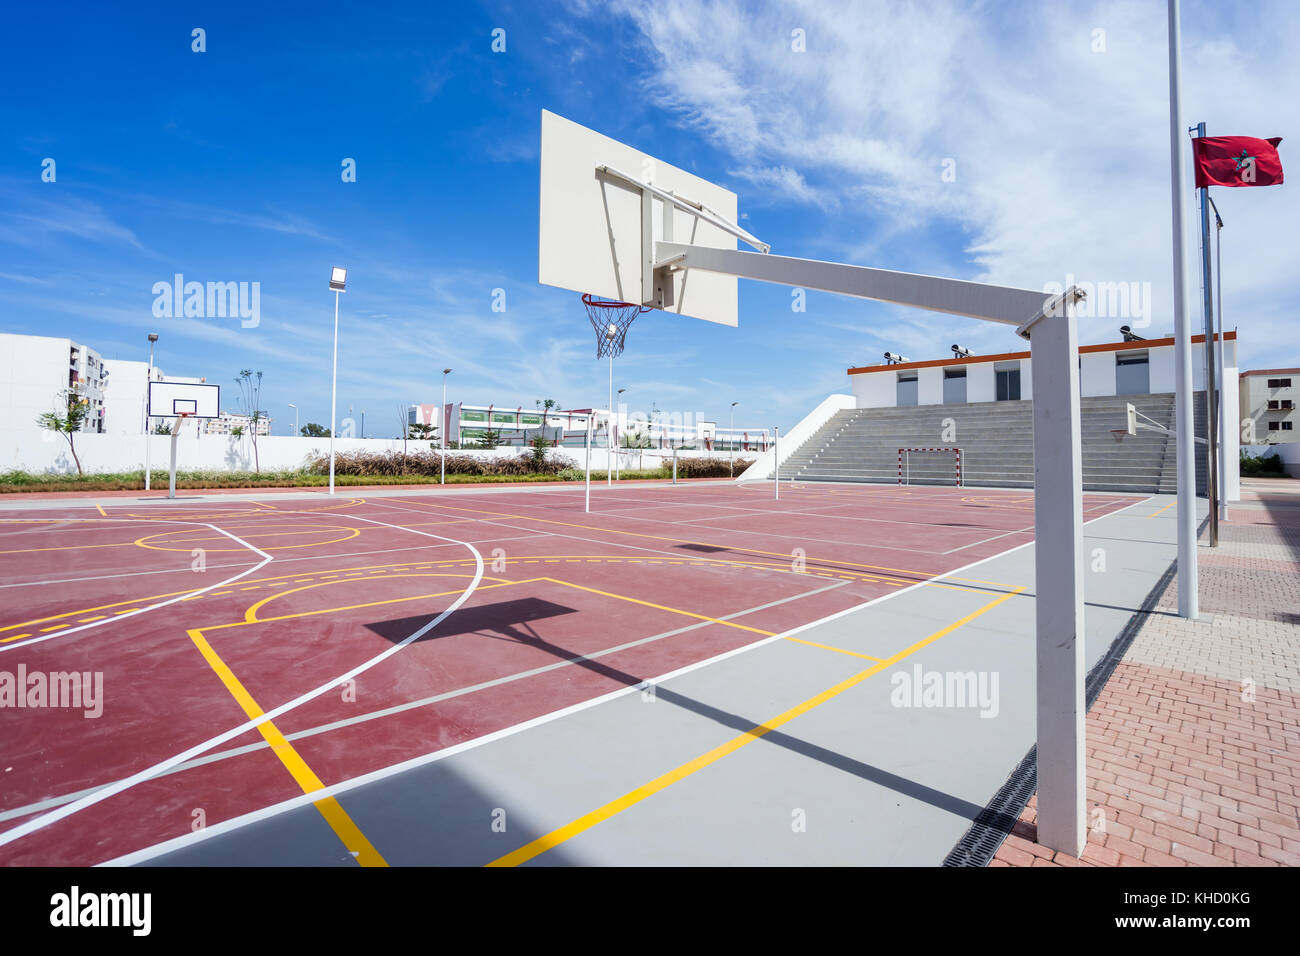 outdoor Basket ball court in a school, Multisport, Morocco Stock Photo